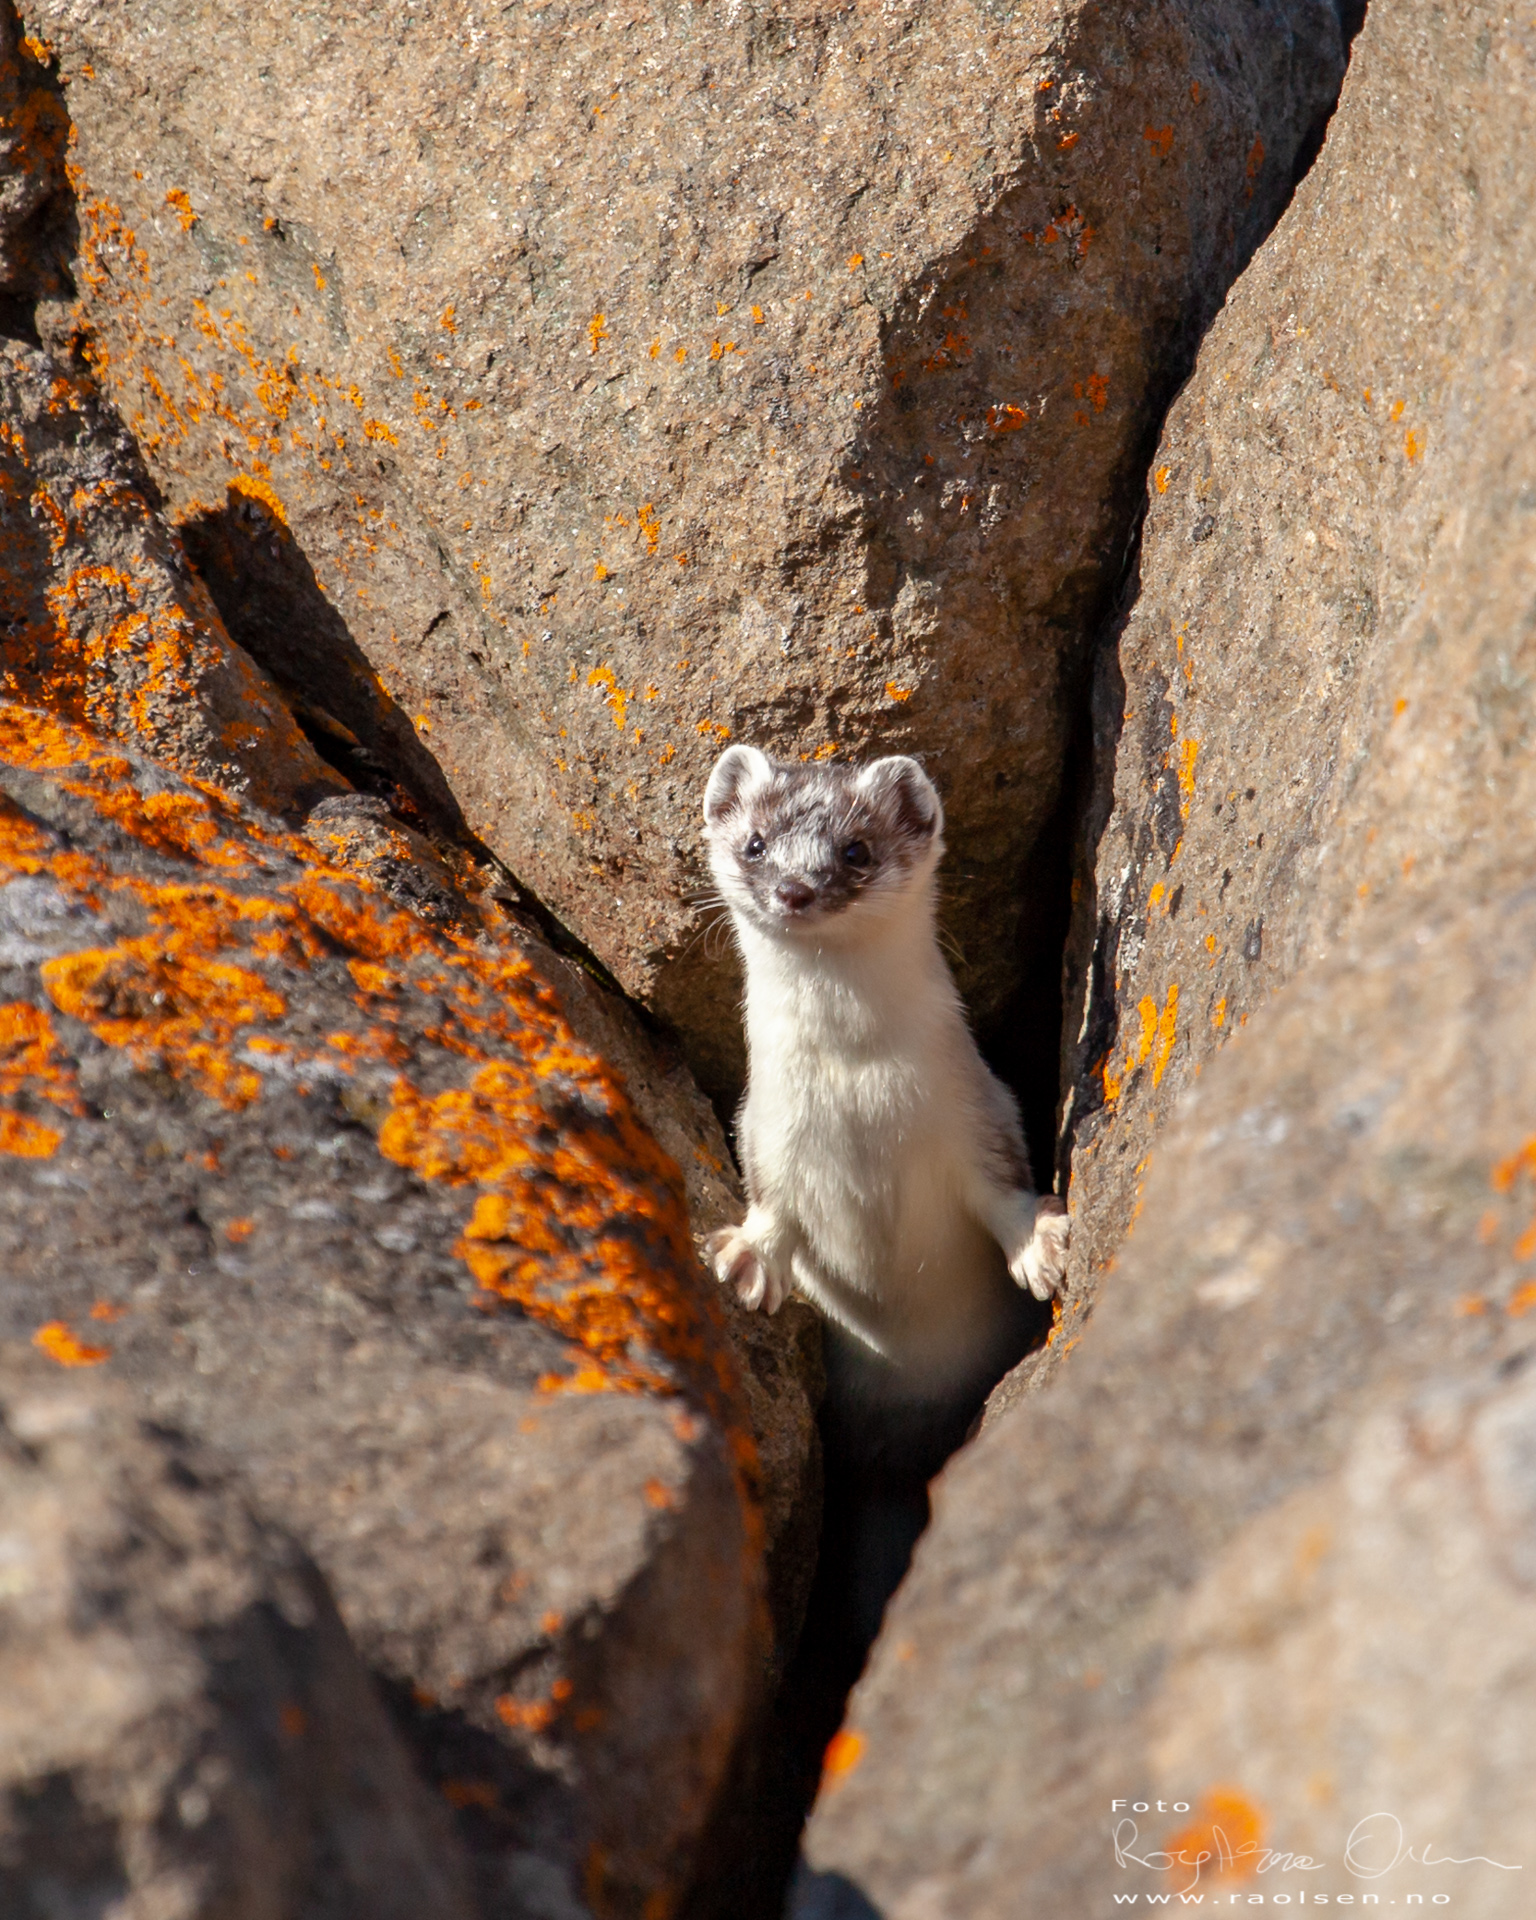 Weasel at Magerøya